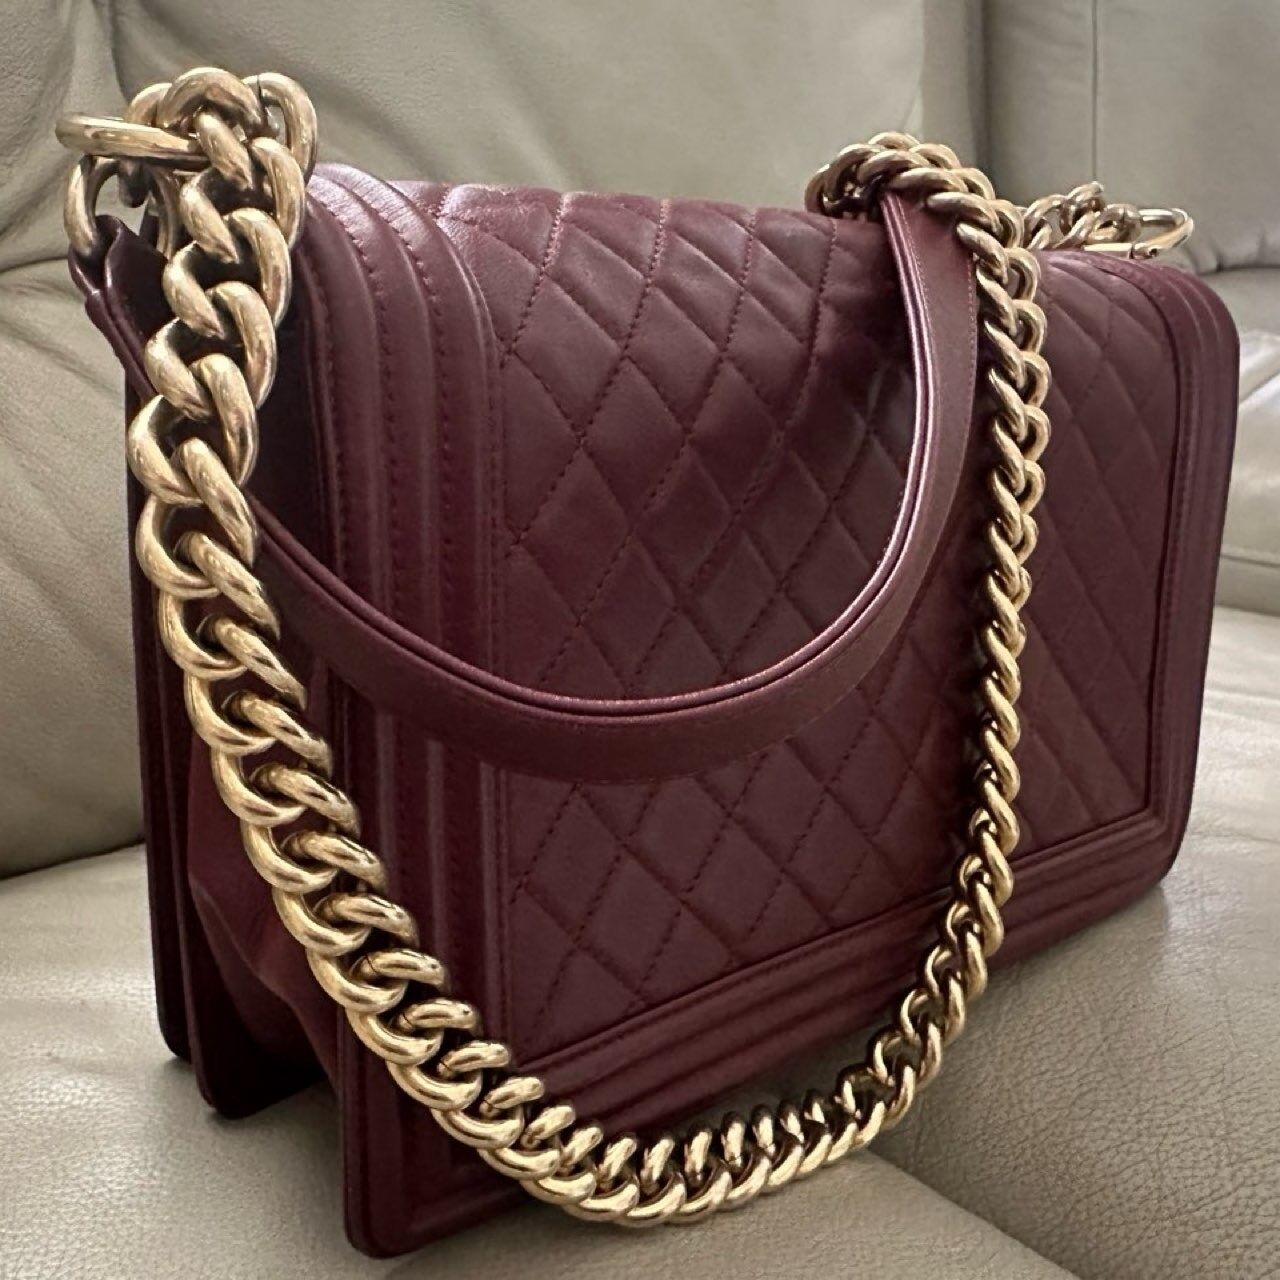 Chanel Boy New Medium Red Maroon Quilted GHW Shoulder Bag